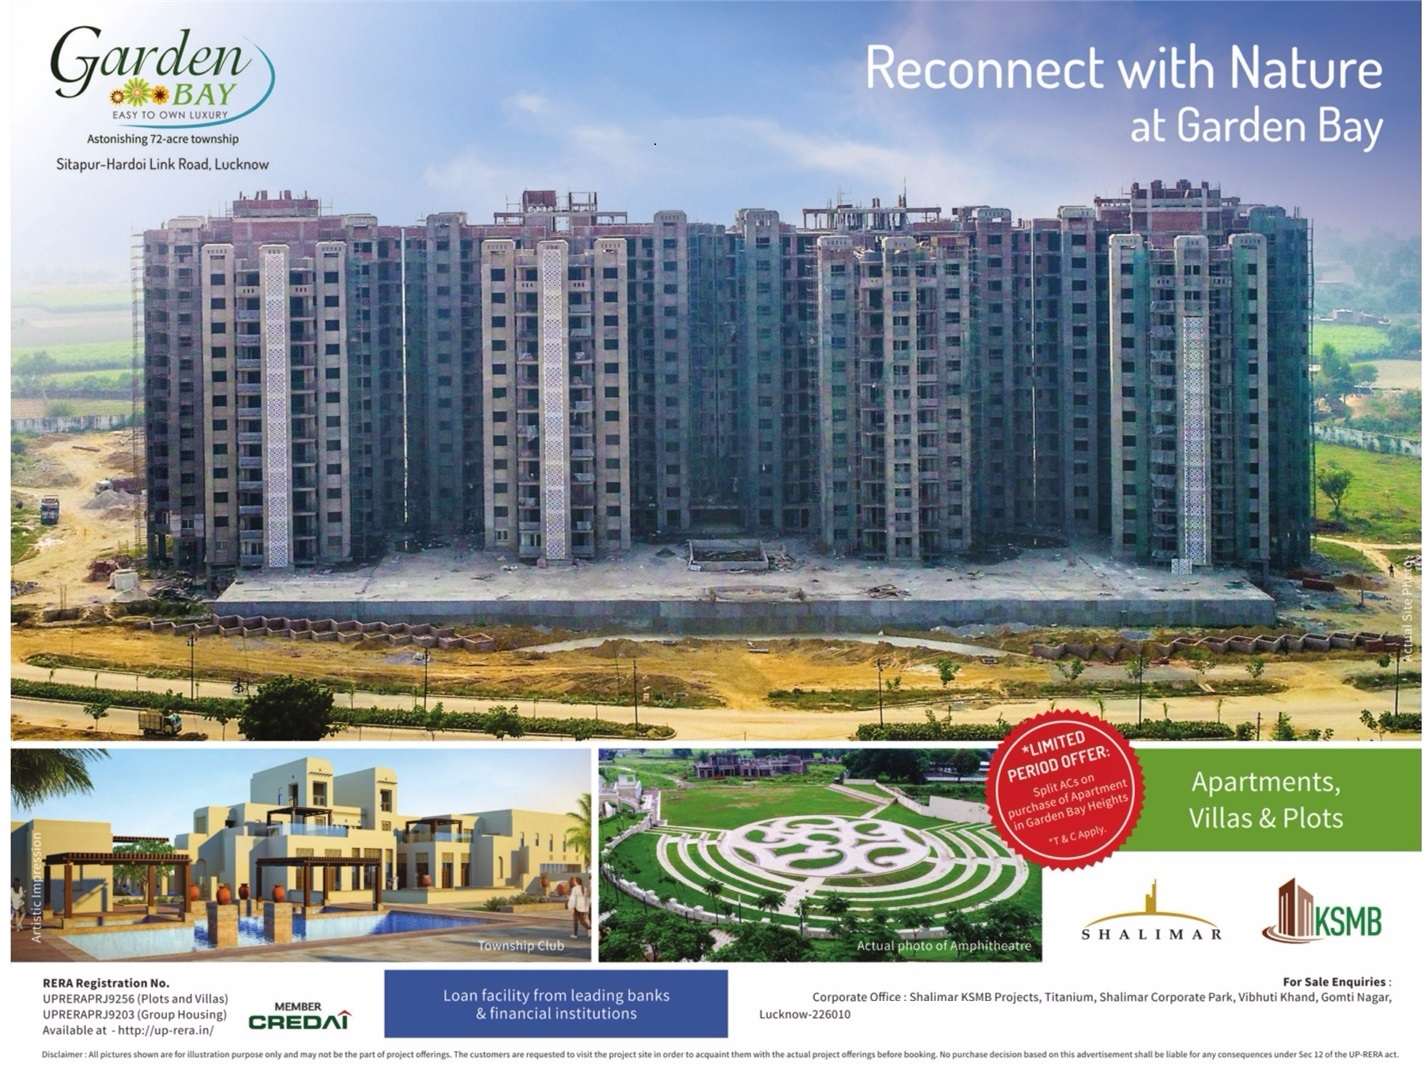 Reconnect with nature at Shalimar Garden Bay in Lucknow